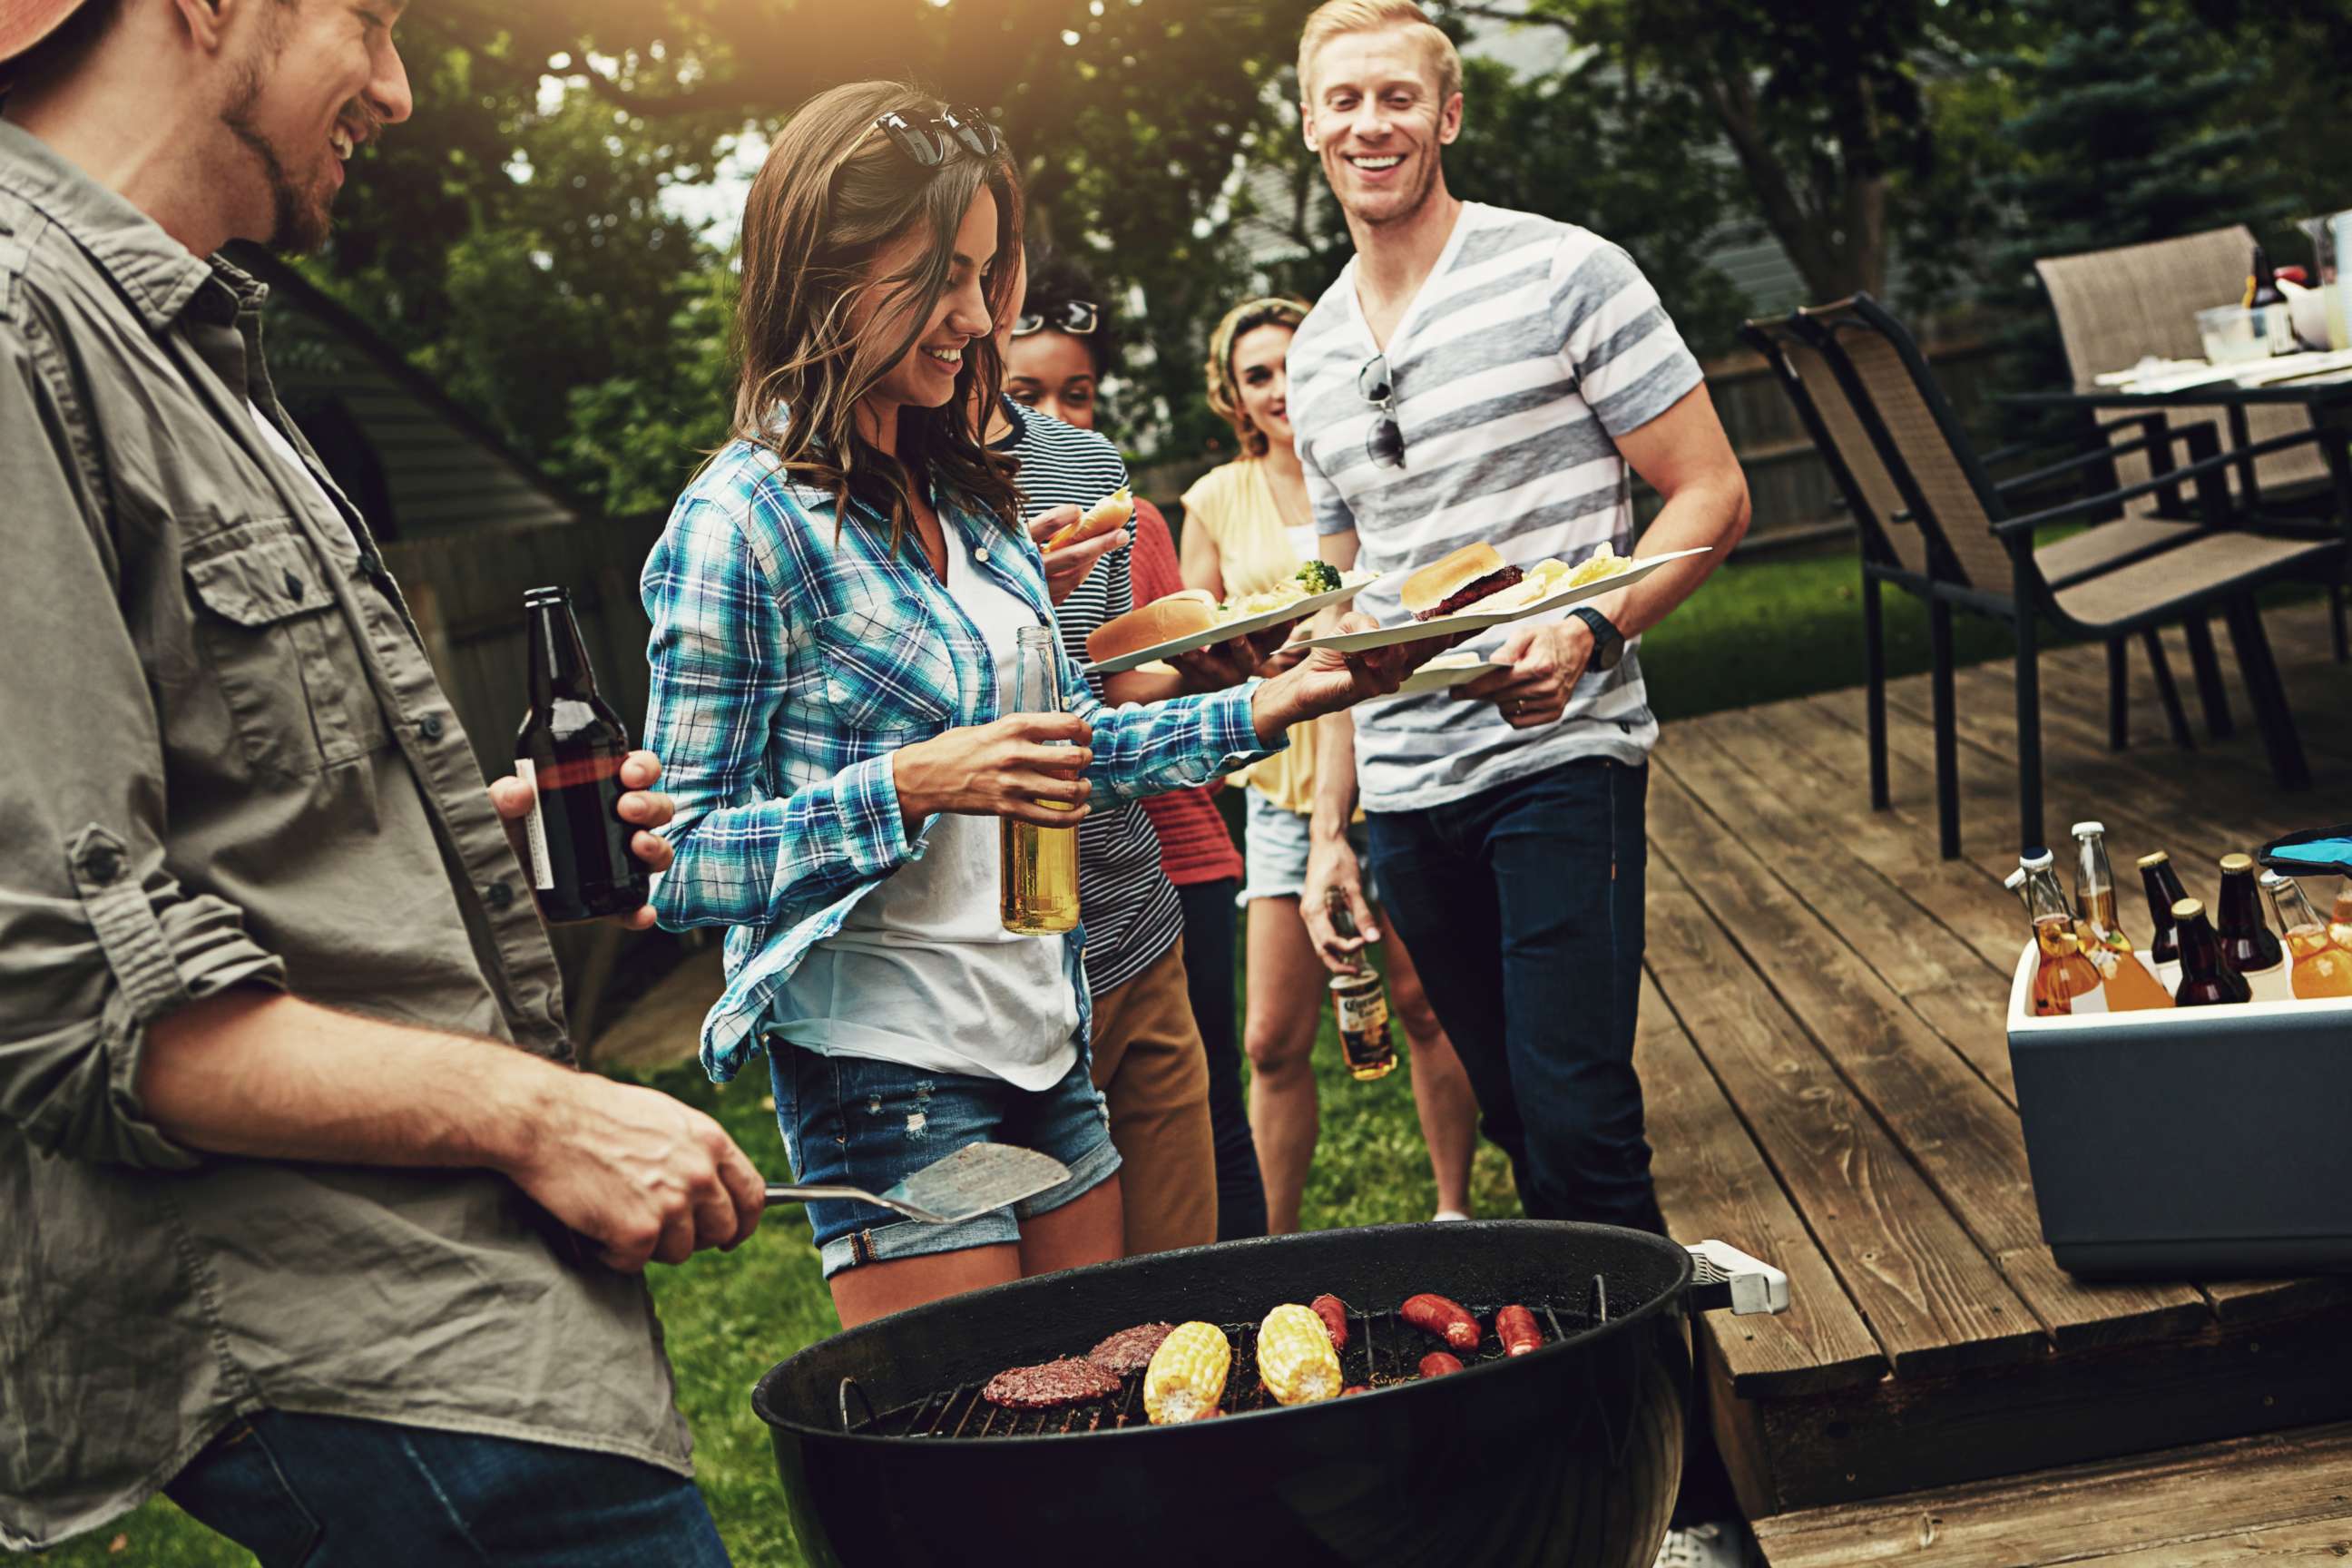 PHOTO: A group pf people having a barbecue in an undated stock photo.